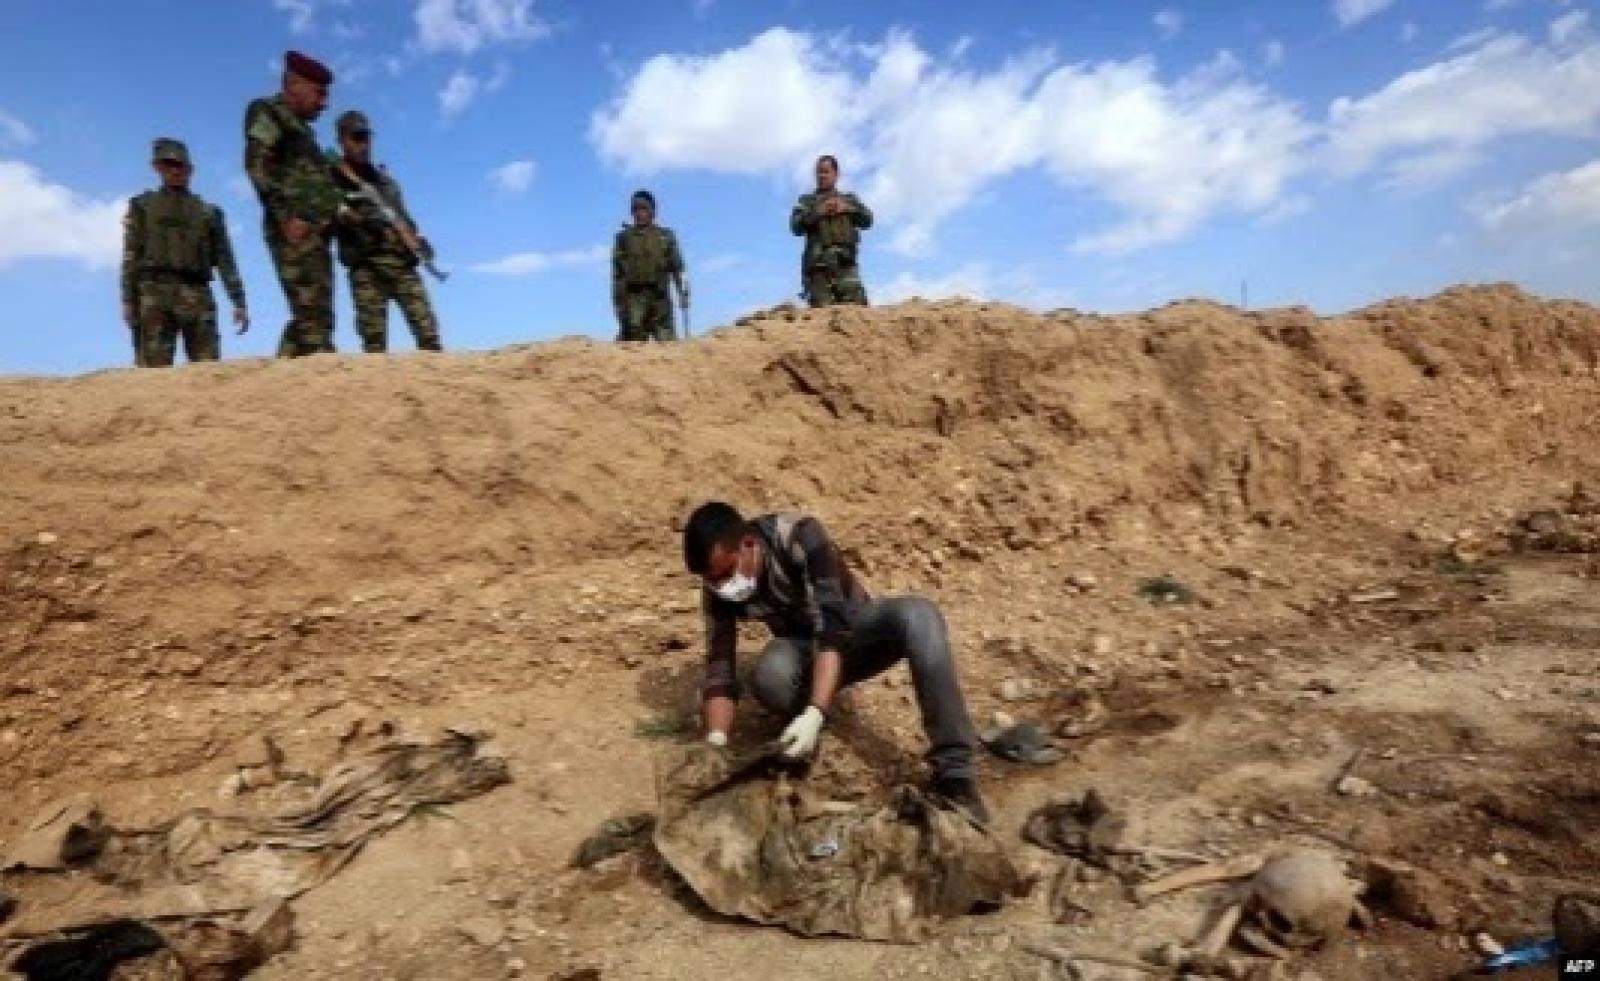 The discovery of 22 graves in Sinjar indicative of Yazidi genocide, Alalam TV Channel, 17 July 2017